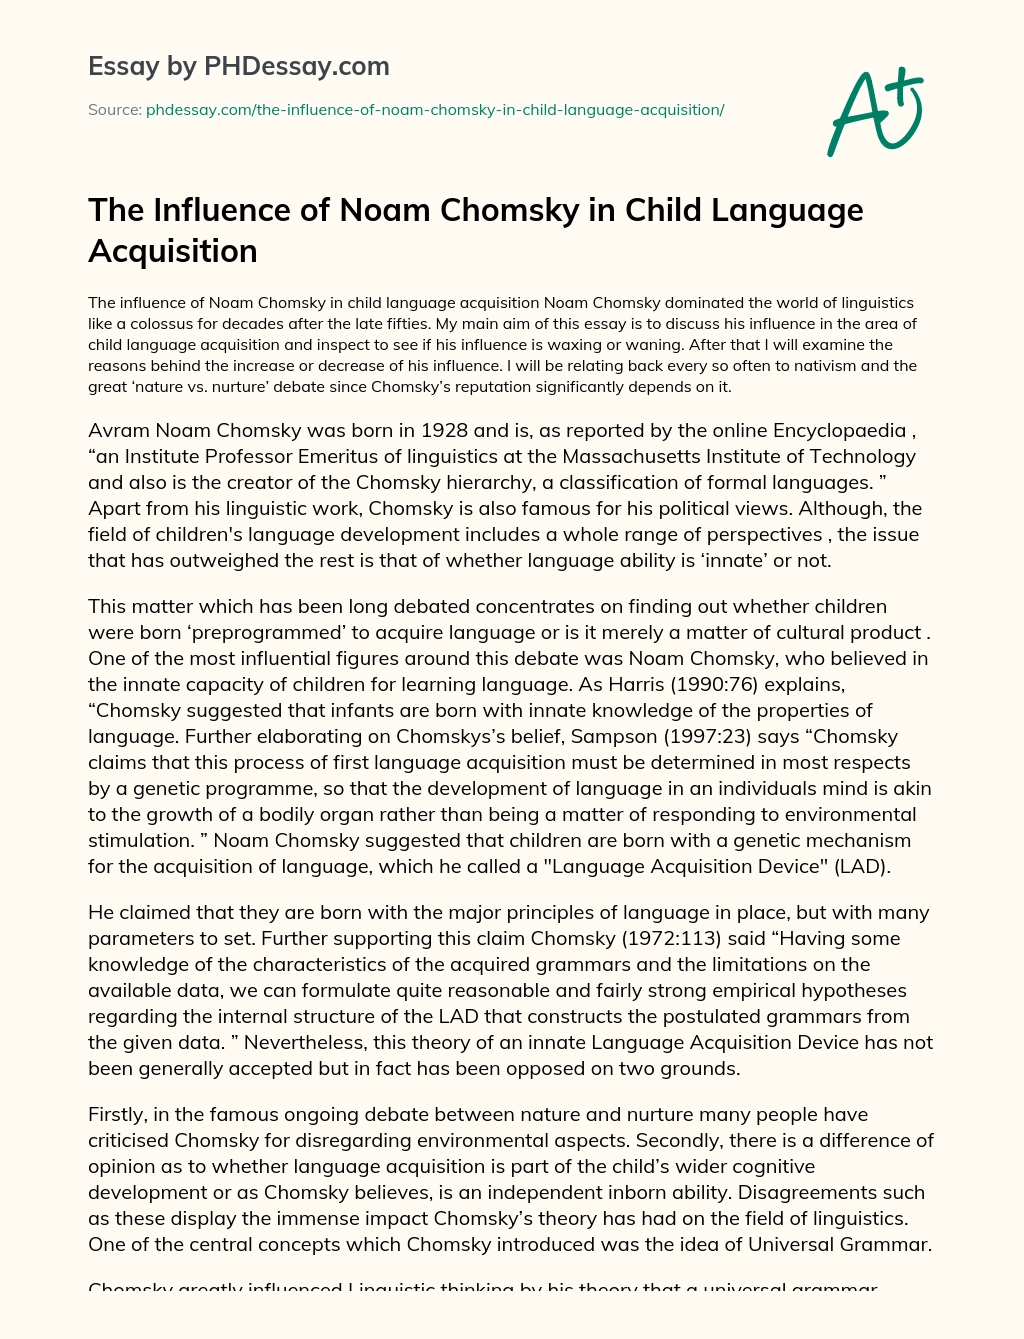 The Influence of Noam Chomsky in Child Language Acquisition essay